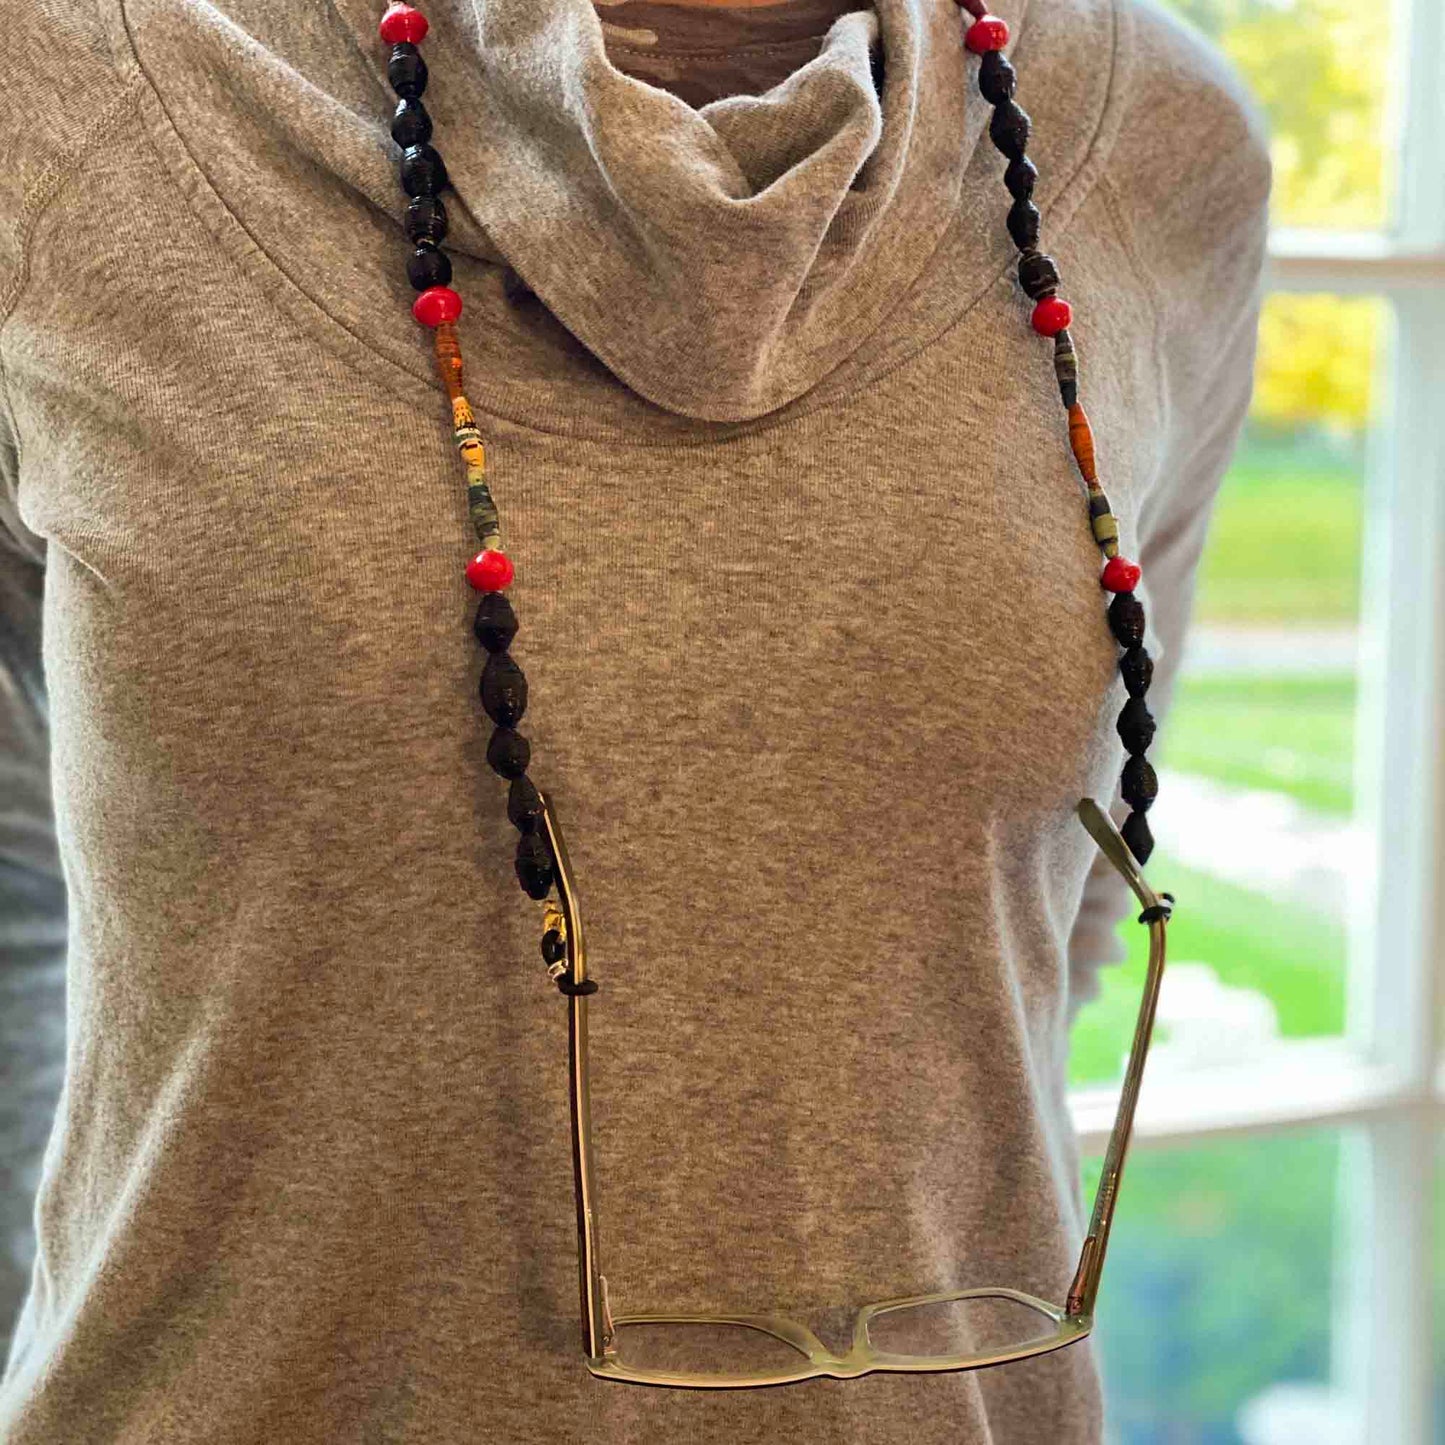 face-mask-eyeglass-paper-bead-chain-black-and-red